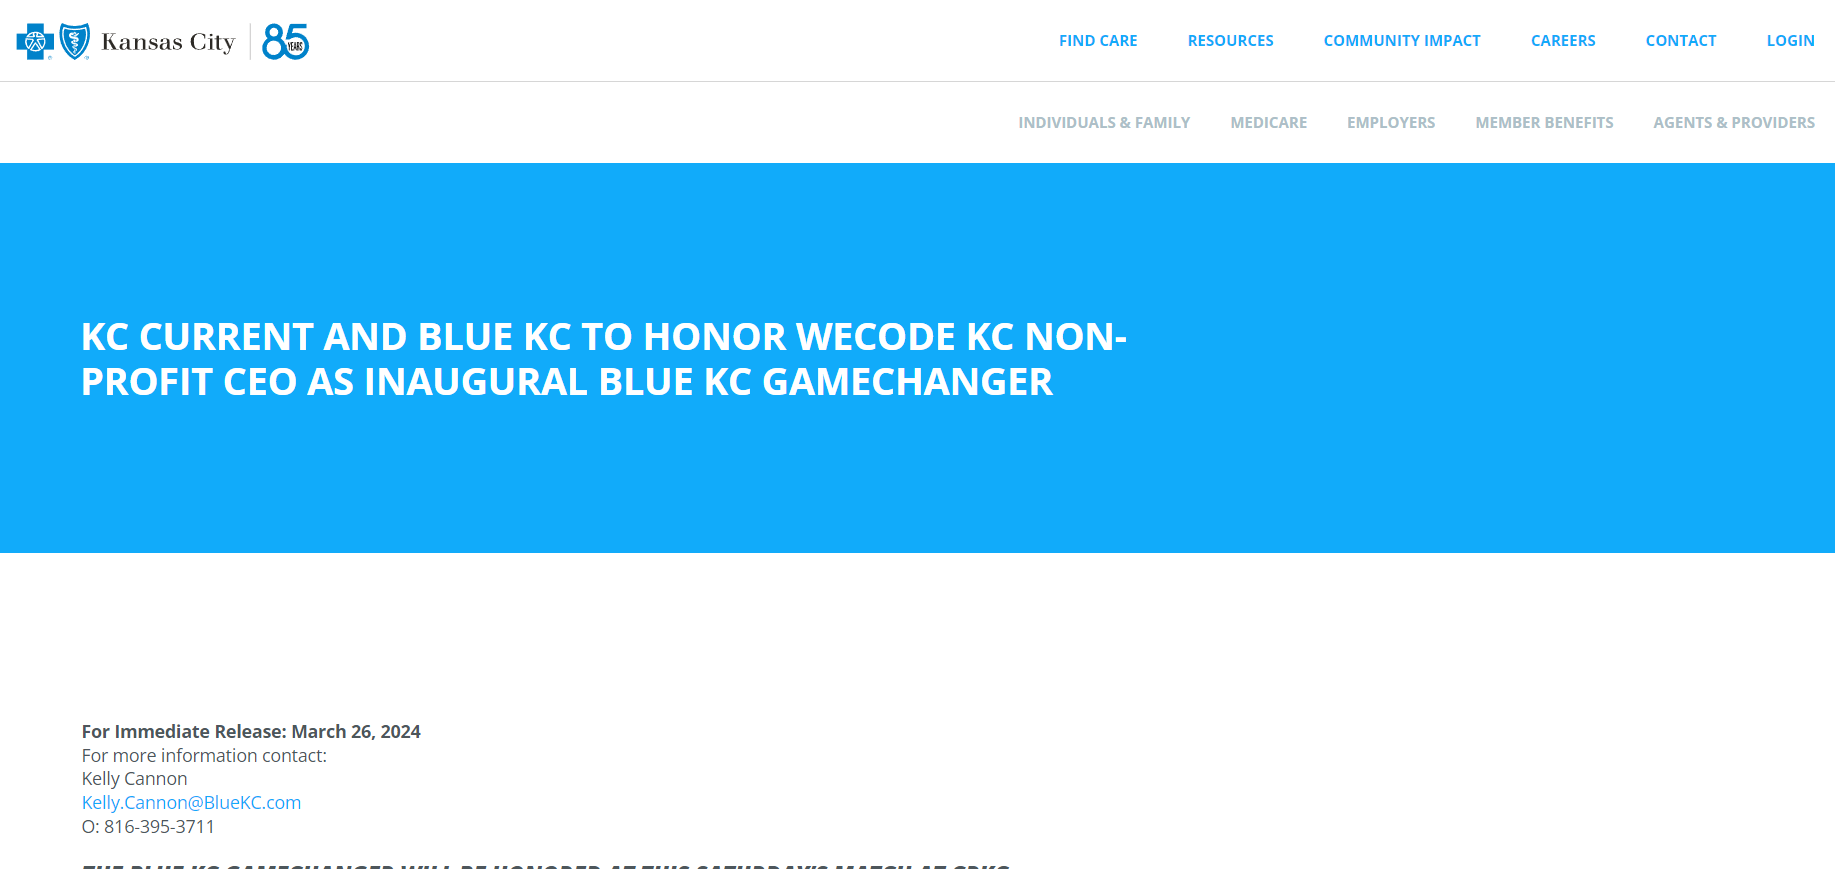 Blue KC Honor WeCodeKC CEO